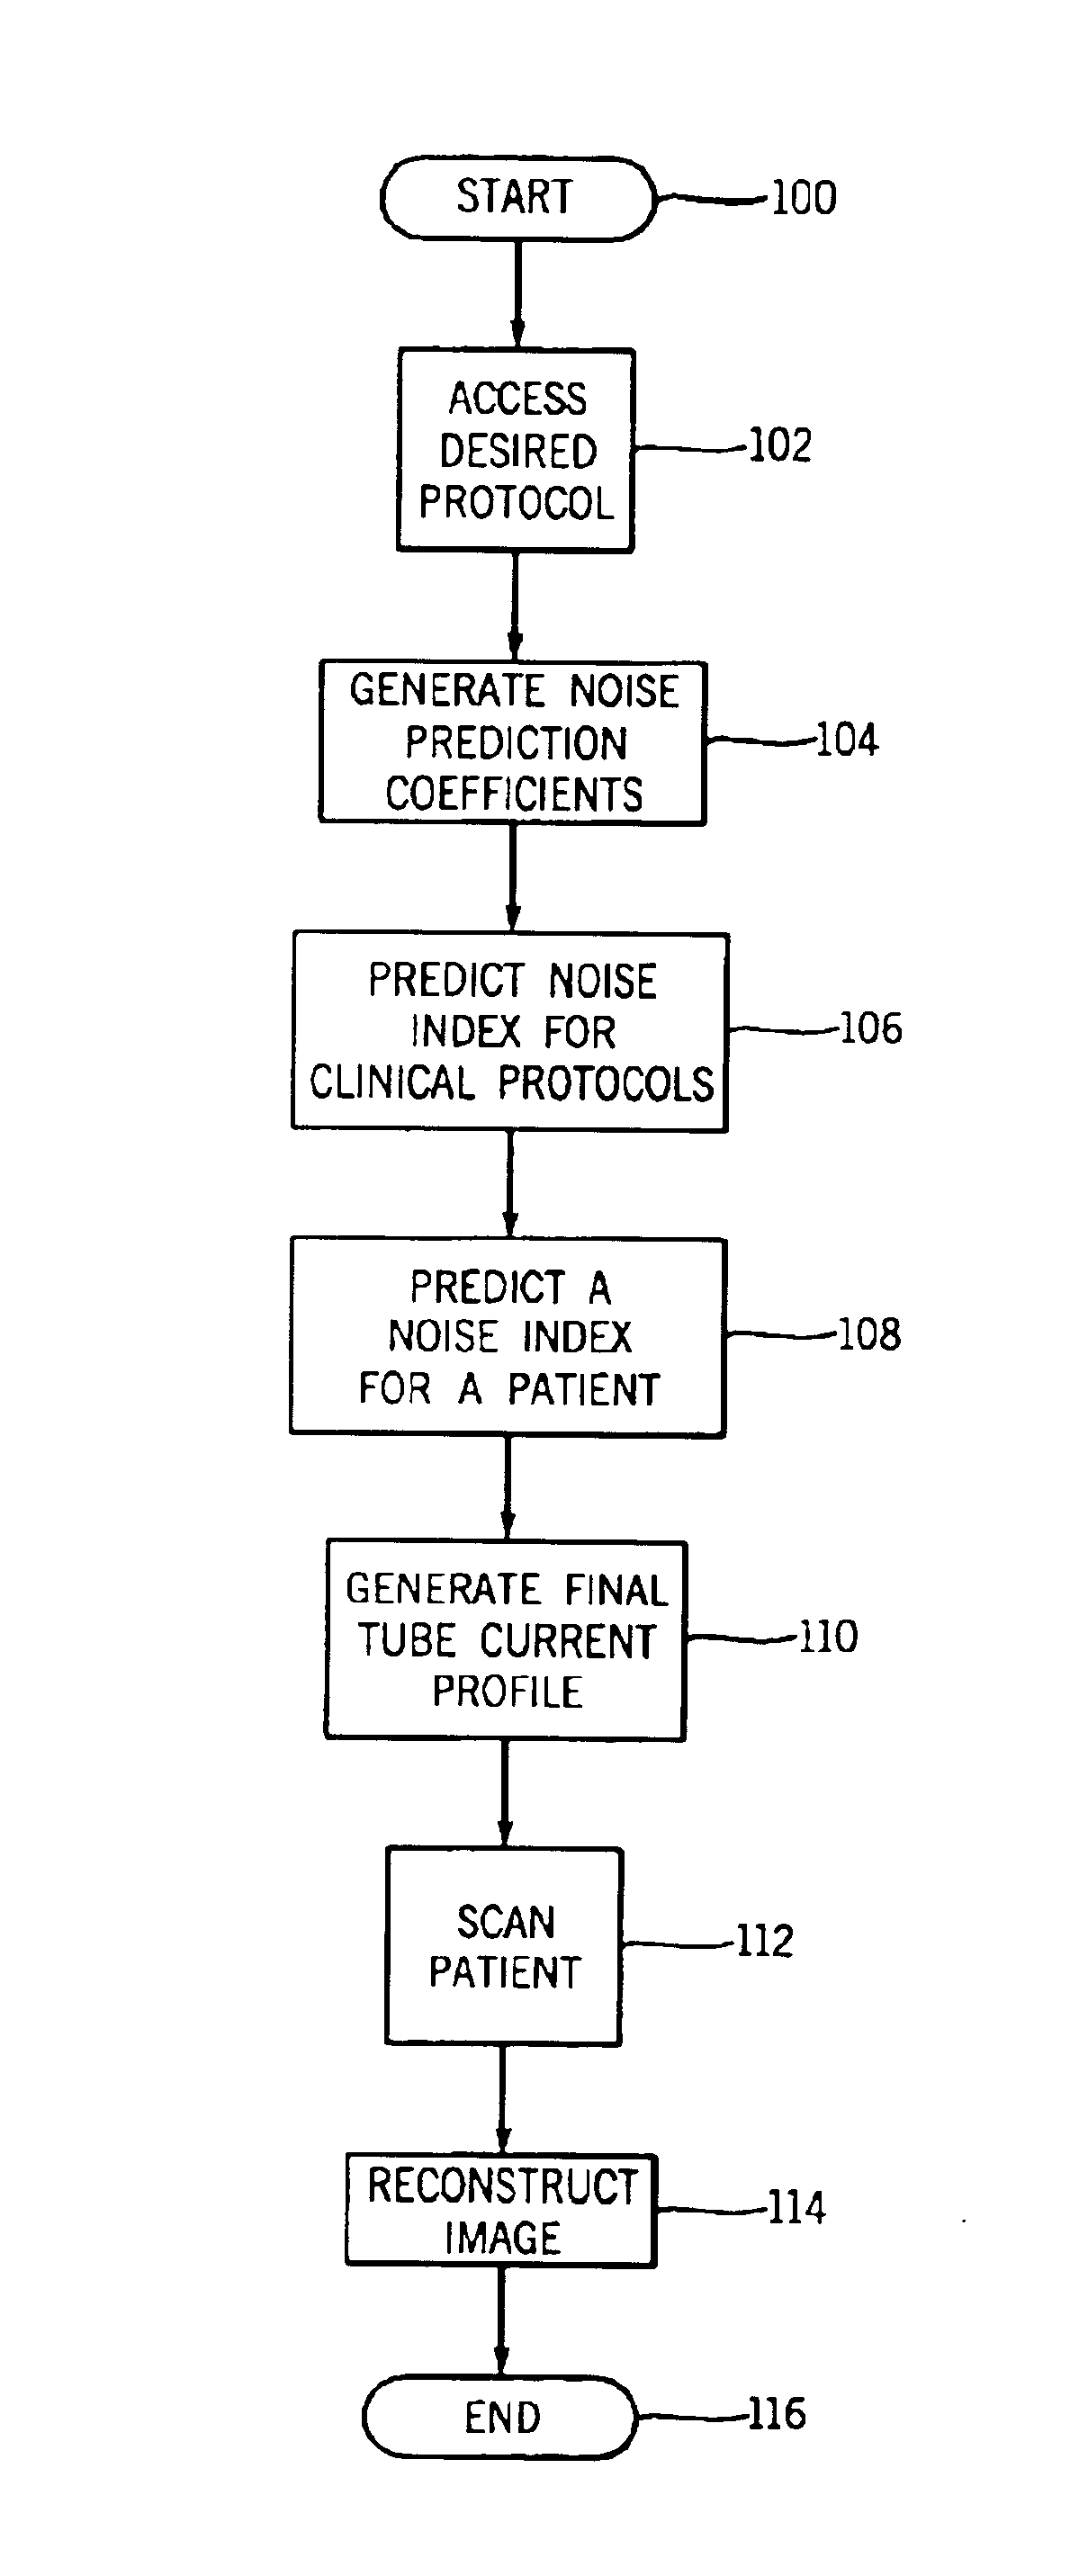 System and method of medical imaging having default noise index override capability